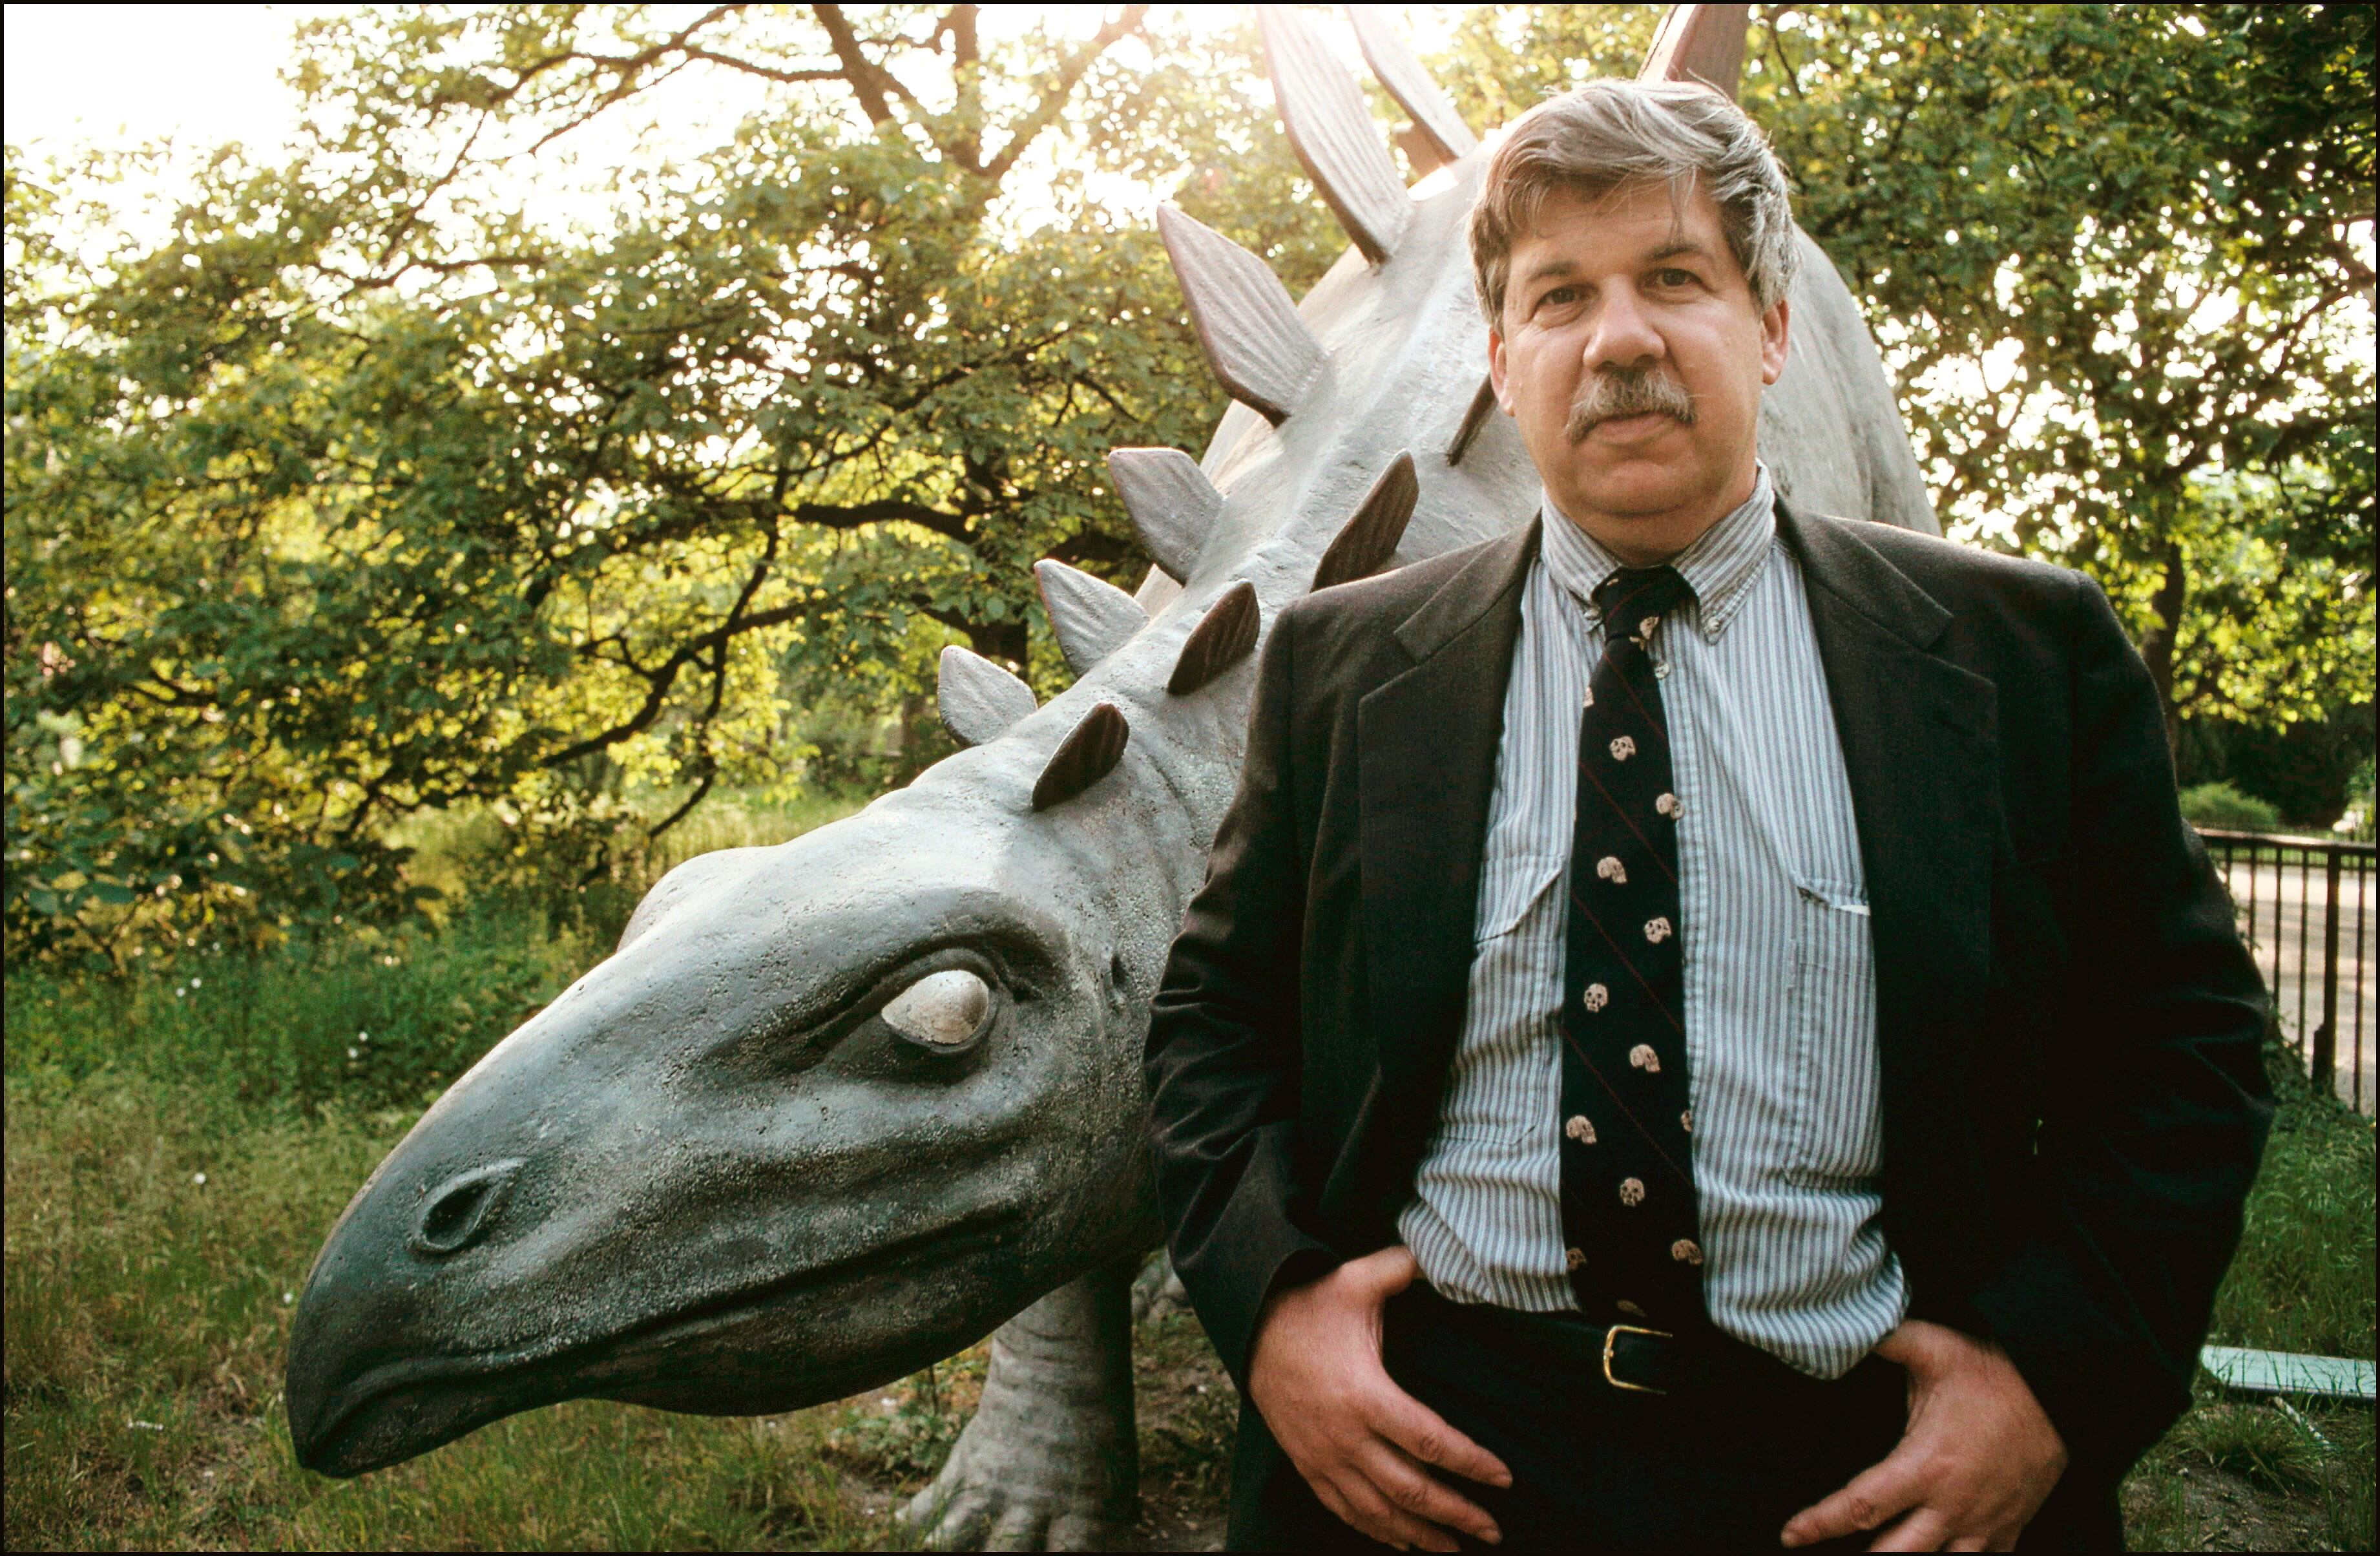 PARIS;FRANCE - MAY 28: American paleontologist Stephen Jay Gould poses in a park during a visit in Paris,France on the 28th of May 1991. (Photo by Ulf Andersen/Getty Images)